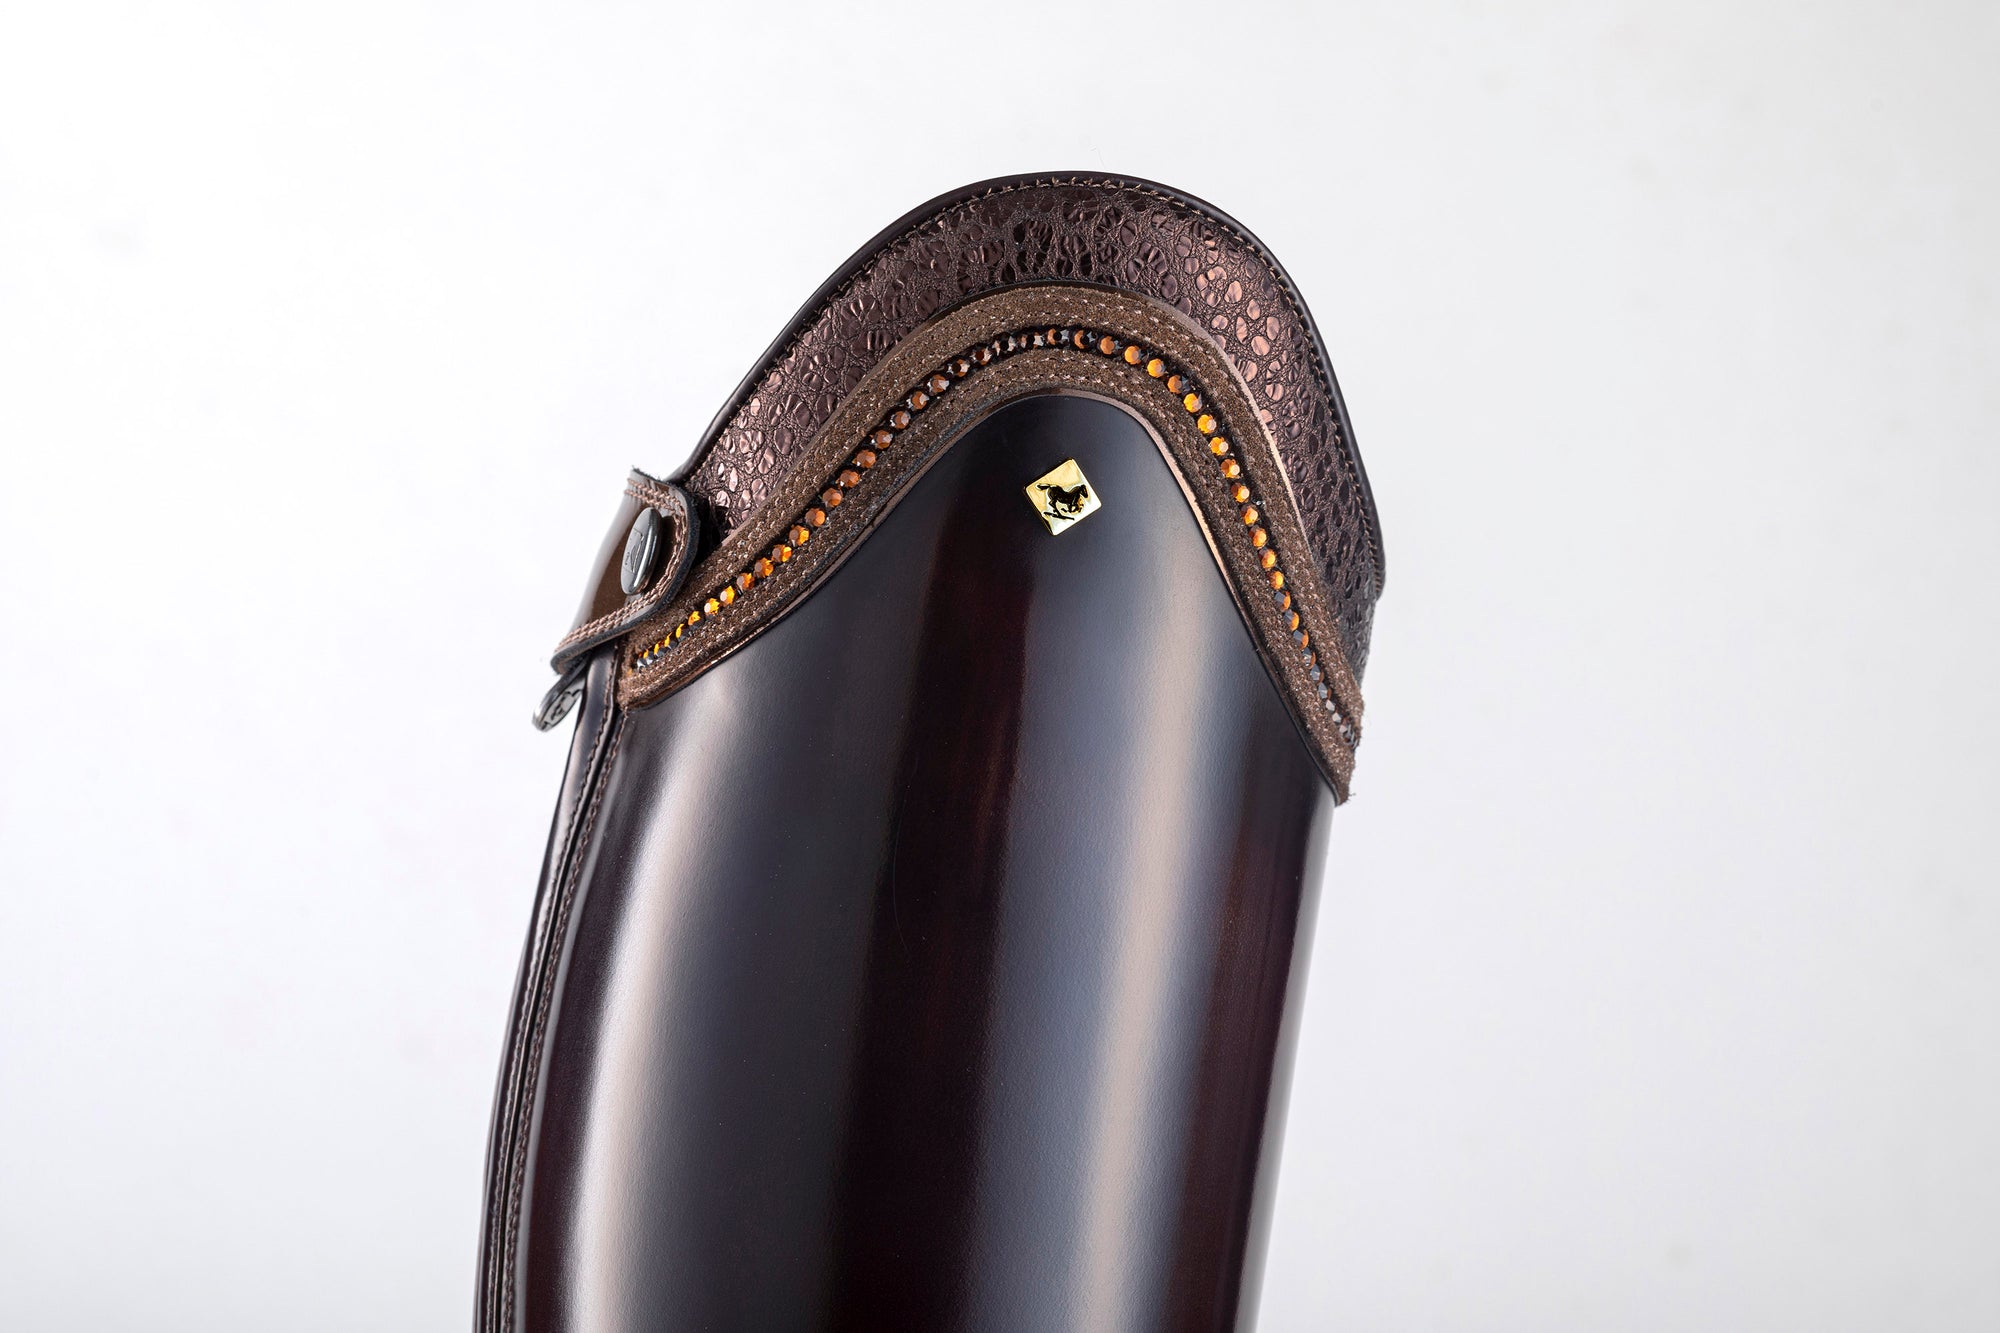 DeNiro Buongiorno collection S3601 boot - Italian Crafted Riding Boot - Gee Gee Equine 